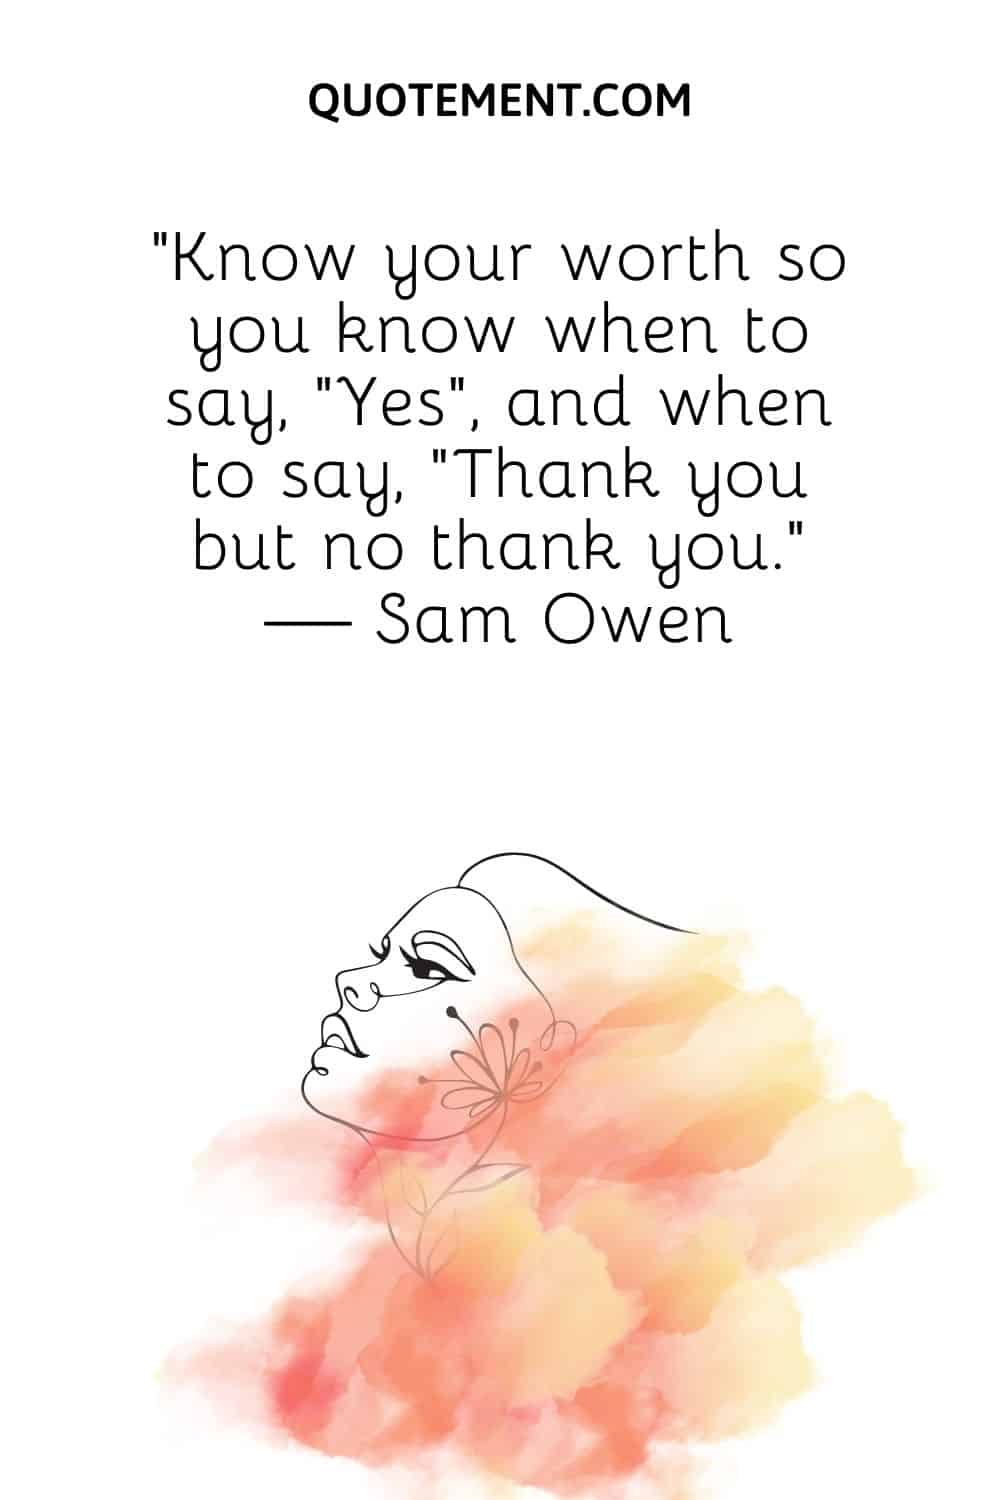 Know your worth so you know when to say, “Yes”, and when to say, “Thank you but no thank you